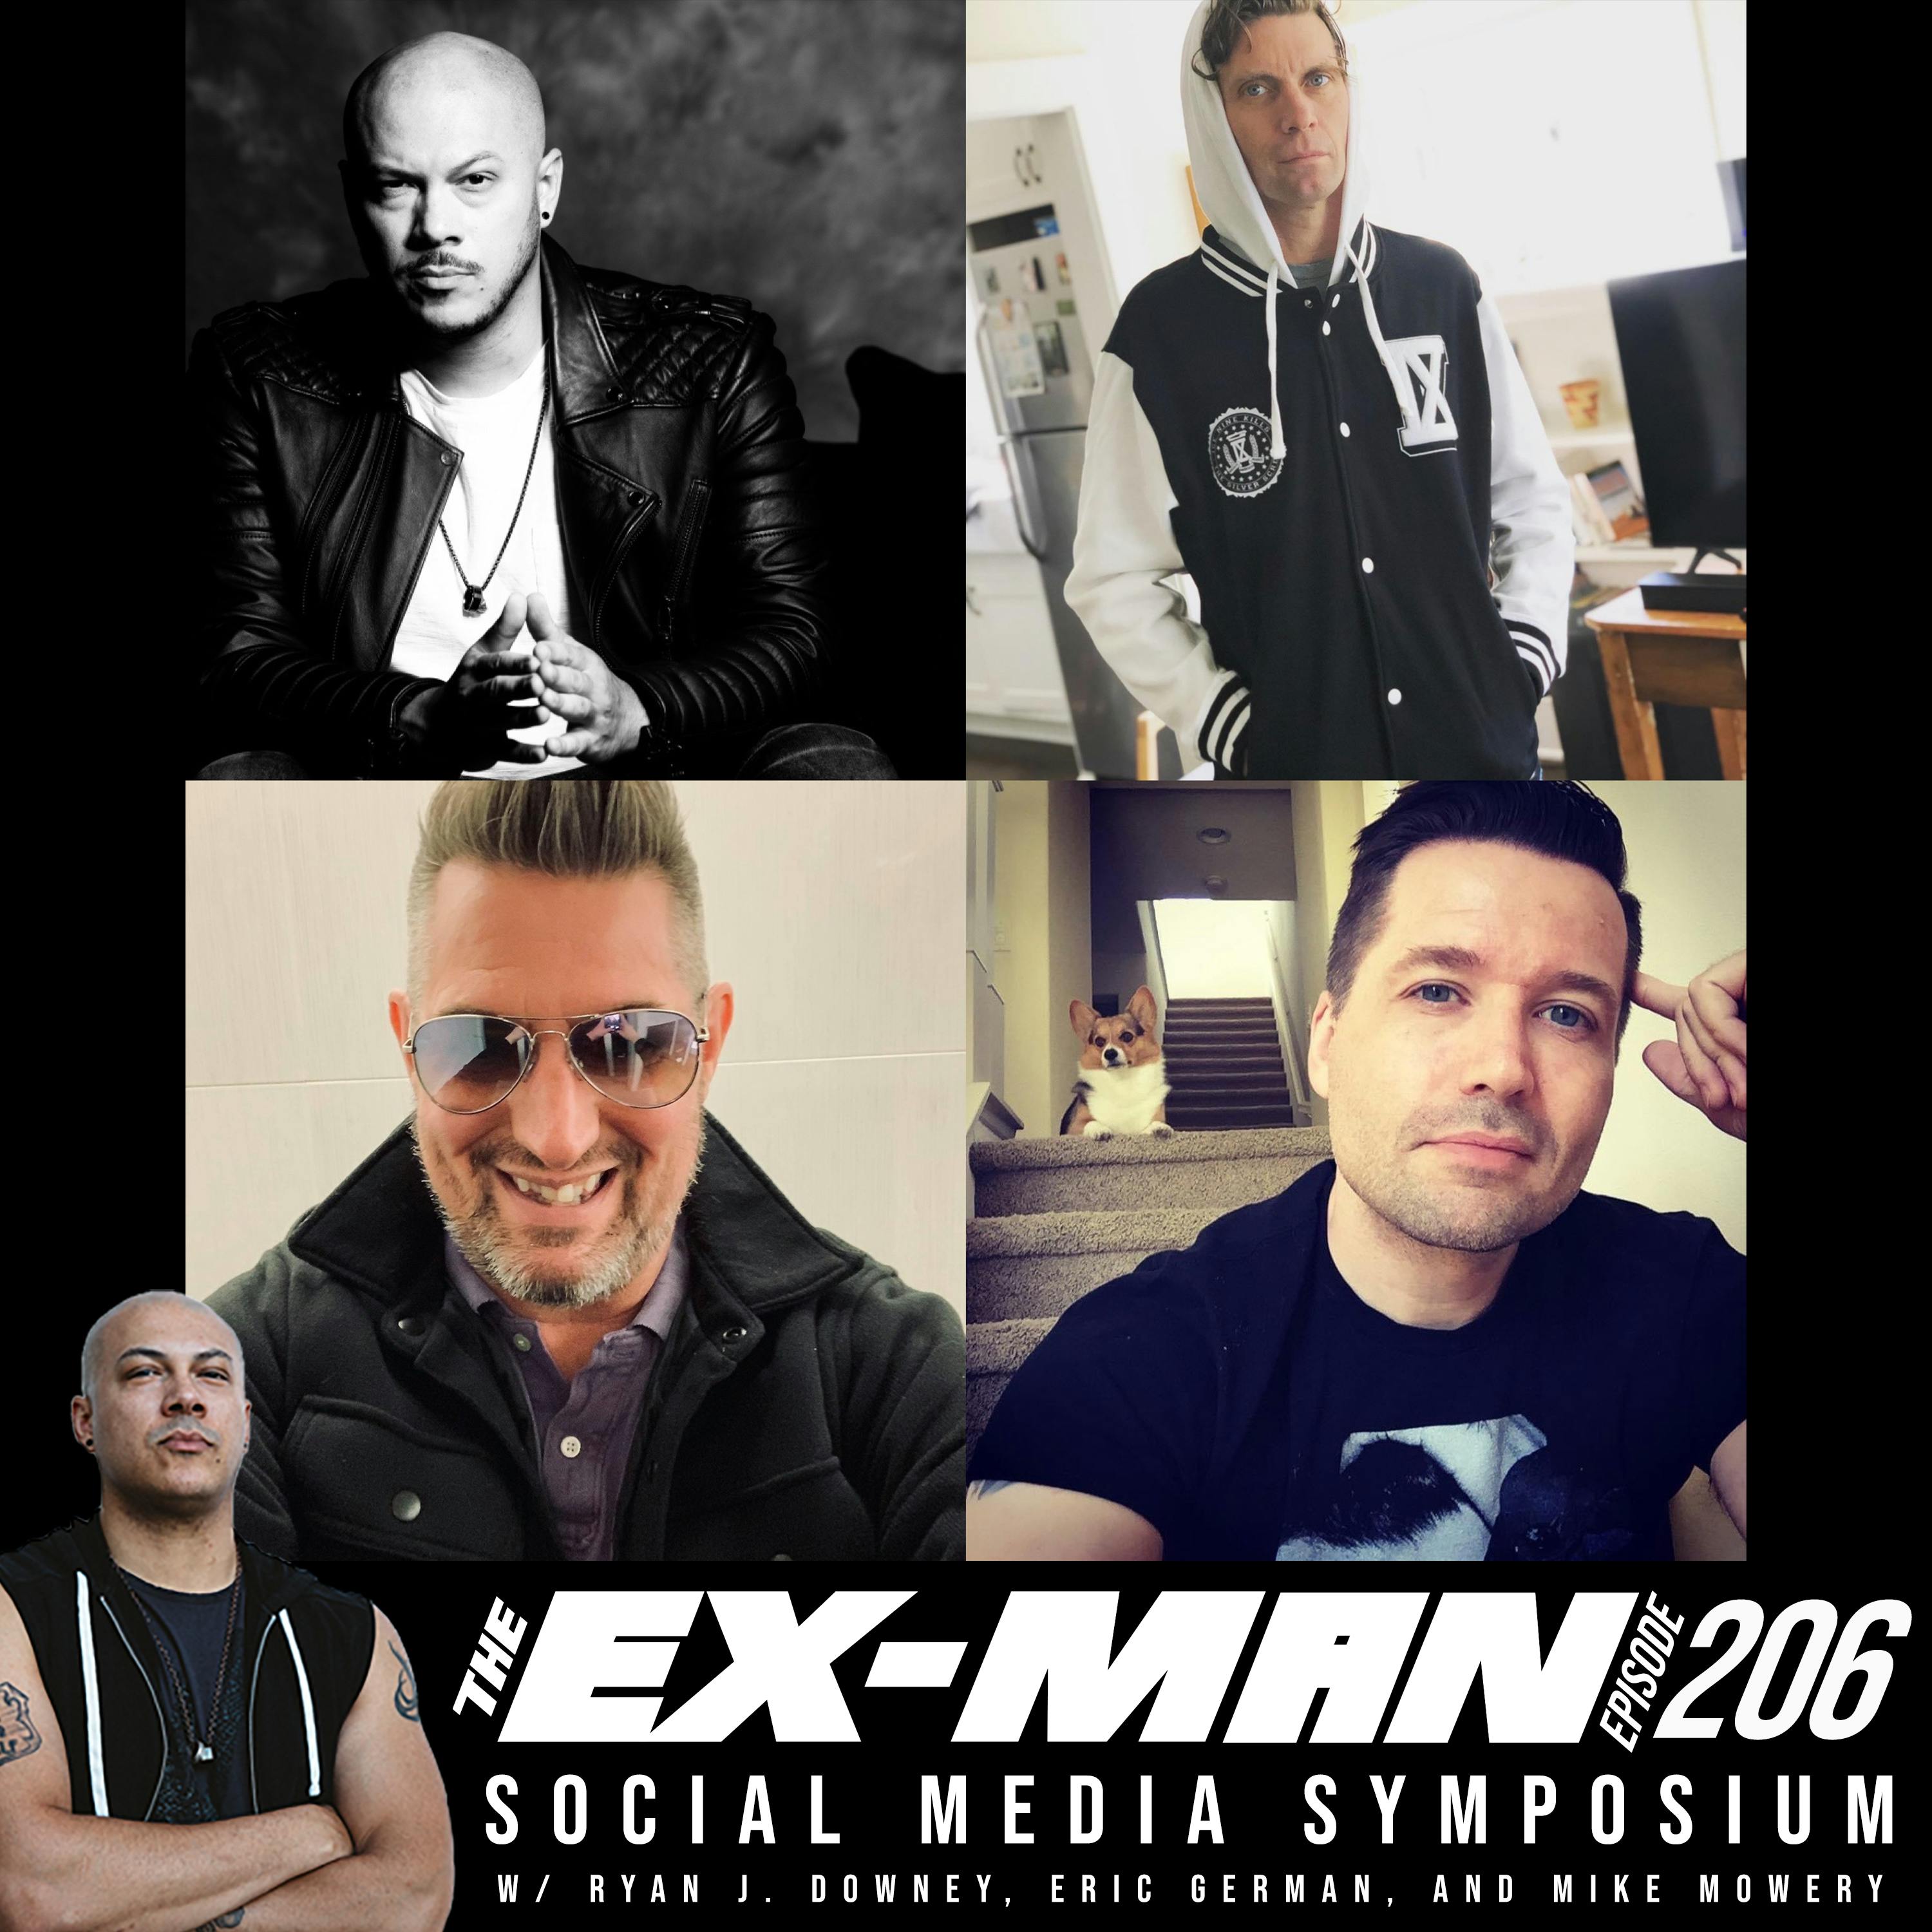 The Social Media Symposium with Ryan J. Downey, Eric German, and Mike Mowery